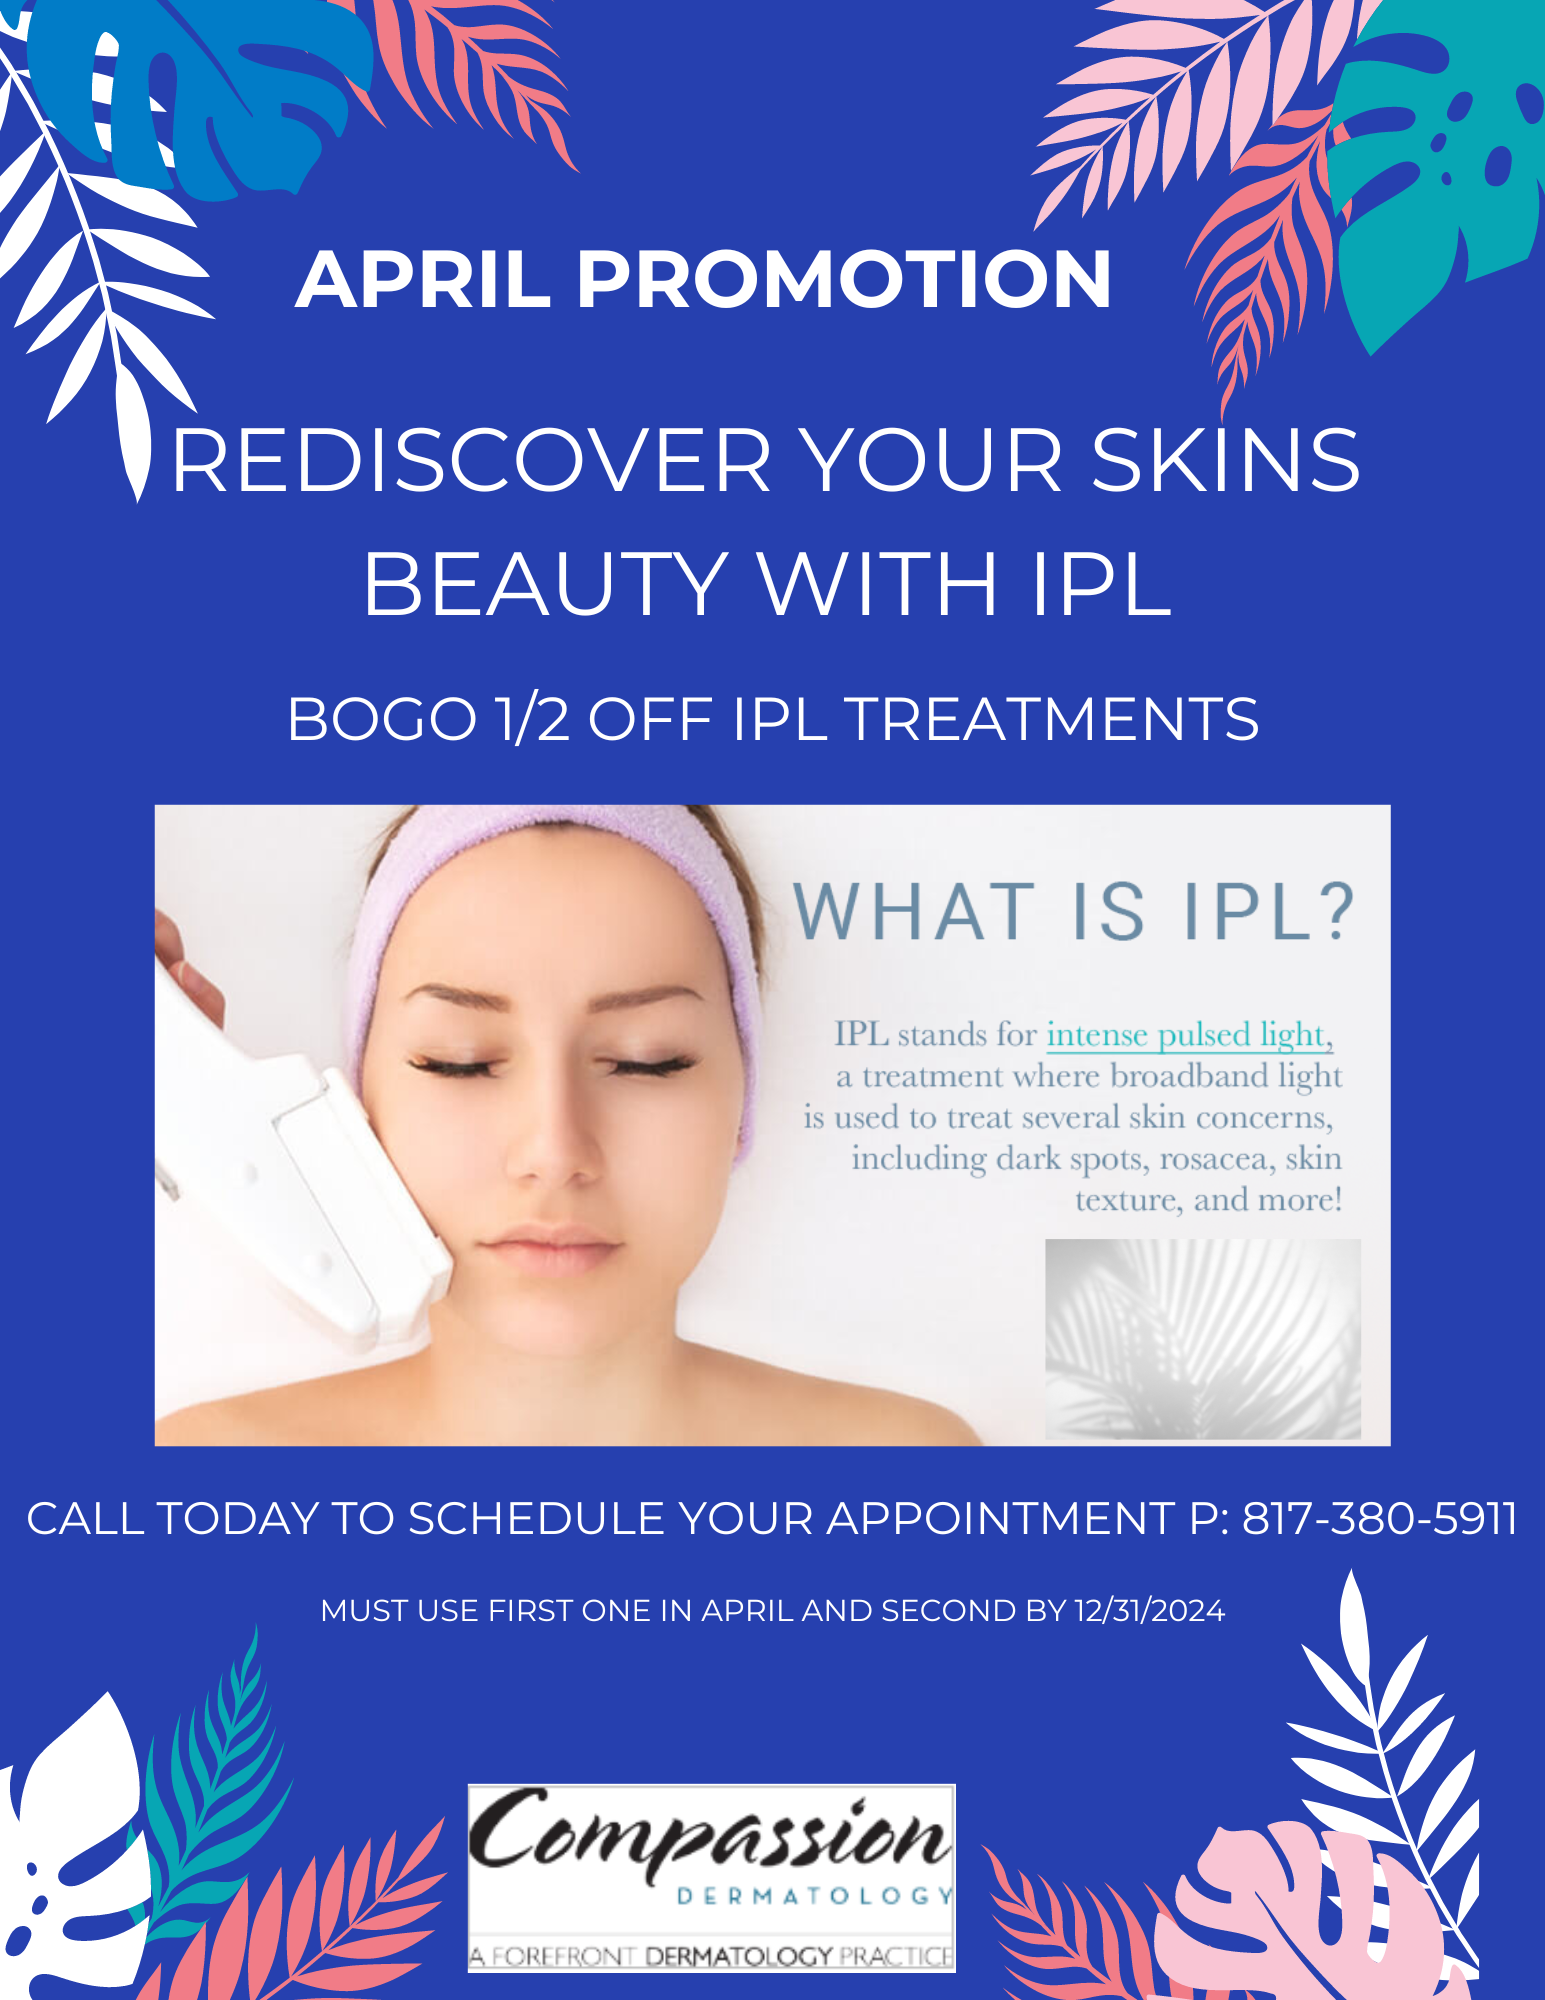 Buy one get one 1/2 off IPL Treatment Coupon